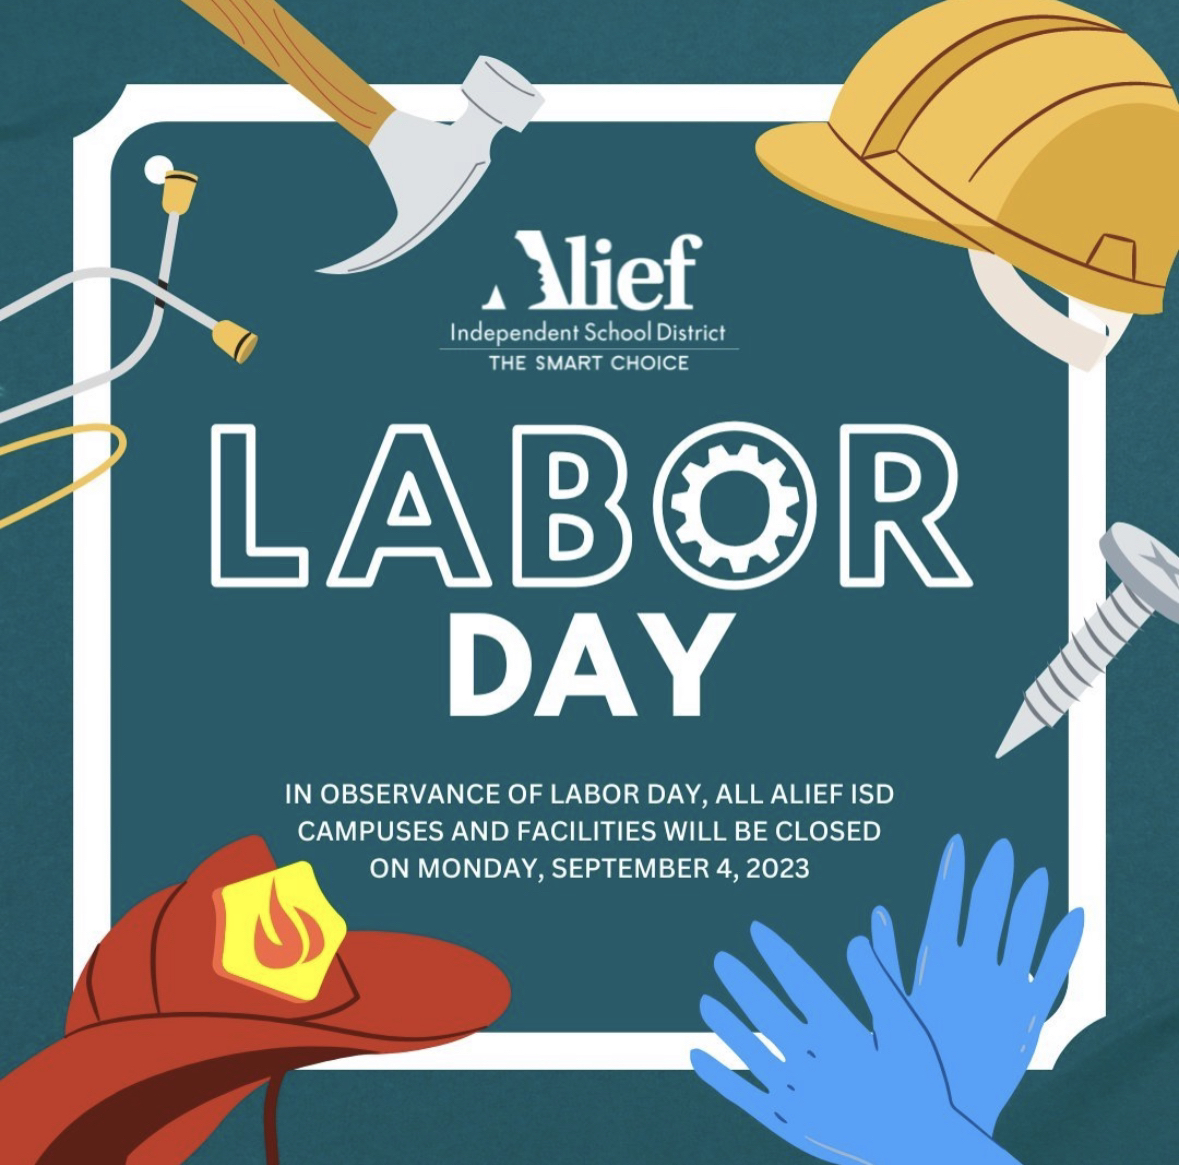 NO SCHOOL Labor Day is coming up this weekend on Monday, September 4. There will be no school to commemorate the holiday. “All Alief ISD campuses and facilities will be closed,” stated the Alief ISD Instagram page. “For the Alief ISD calendar, visit: https://www.aliefisd.net/calendar.”